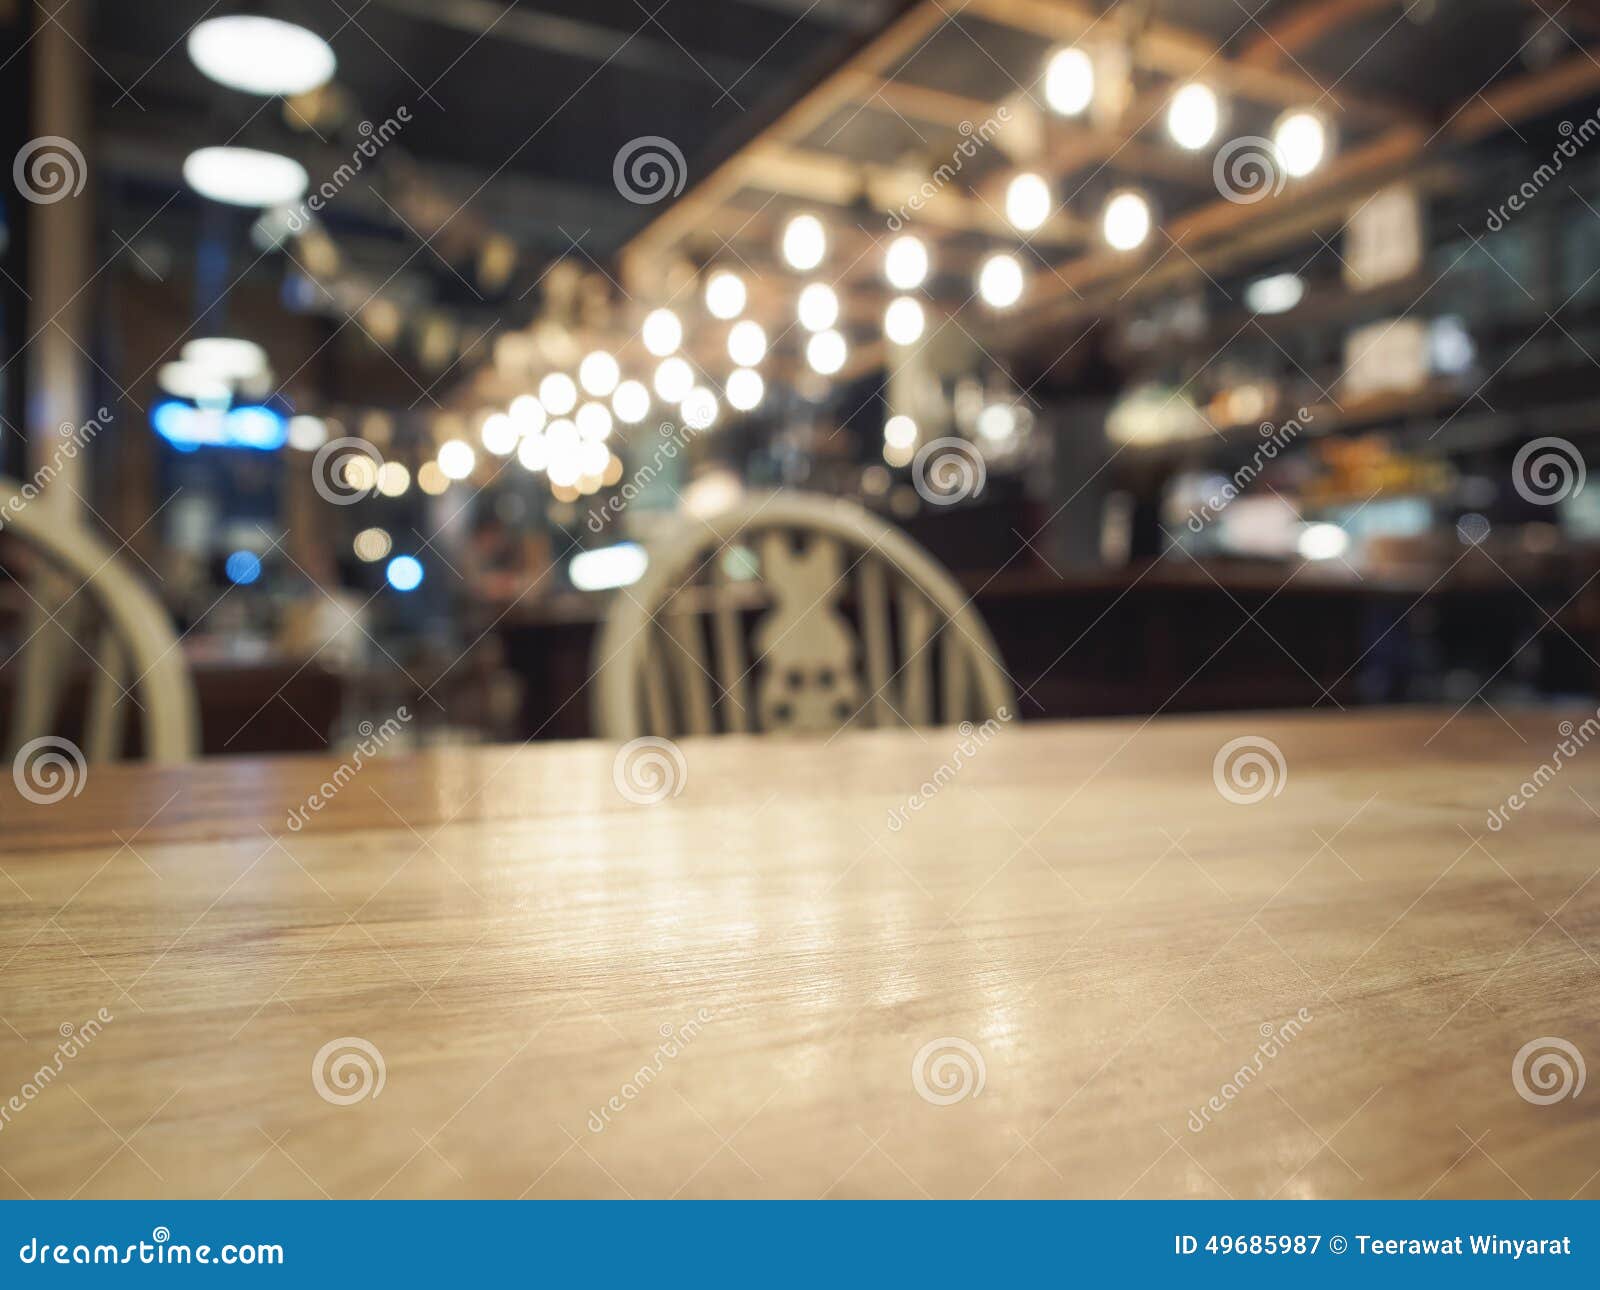 Top Of Wooden Table With Blurred Bar Restaurant Background 